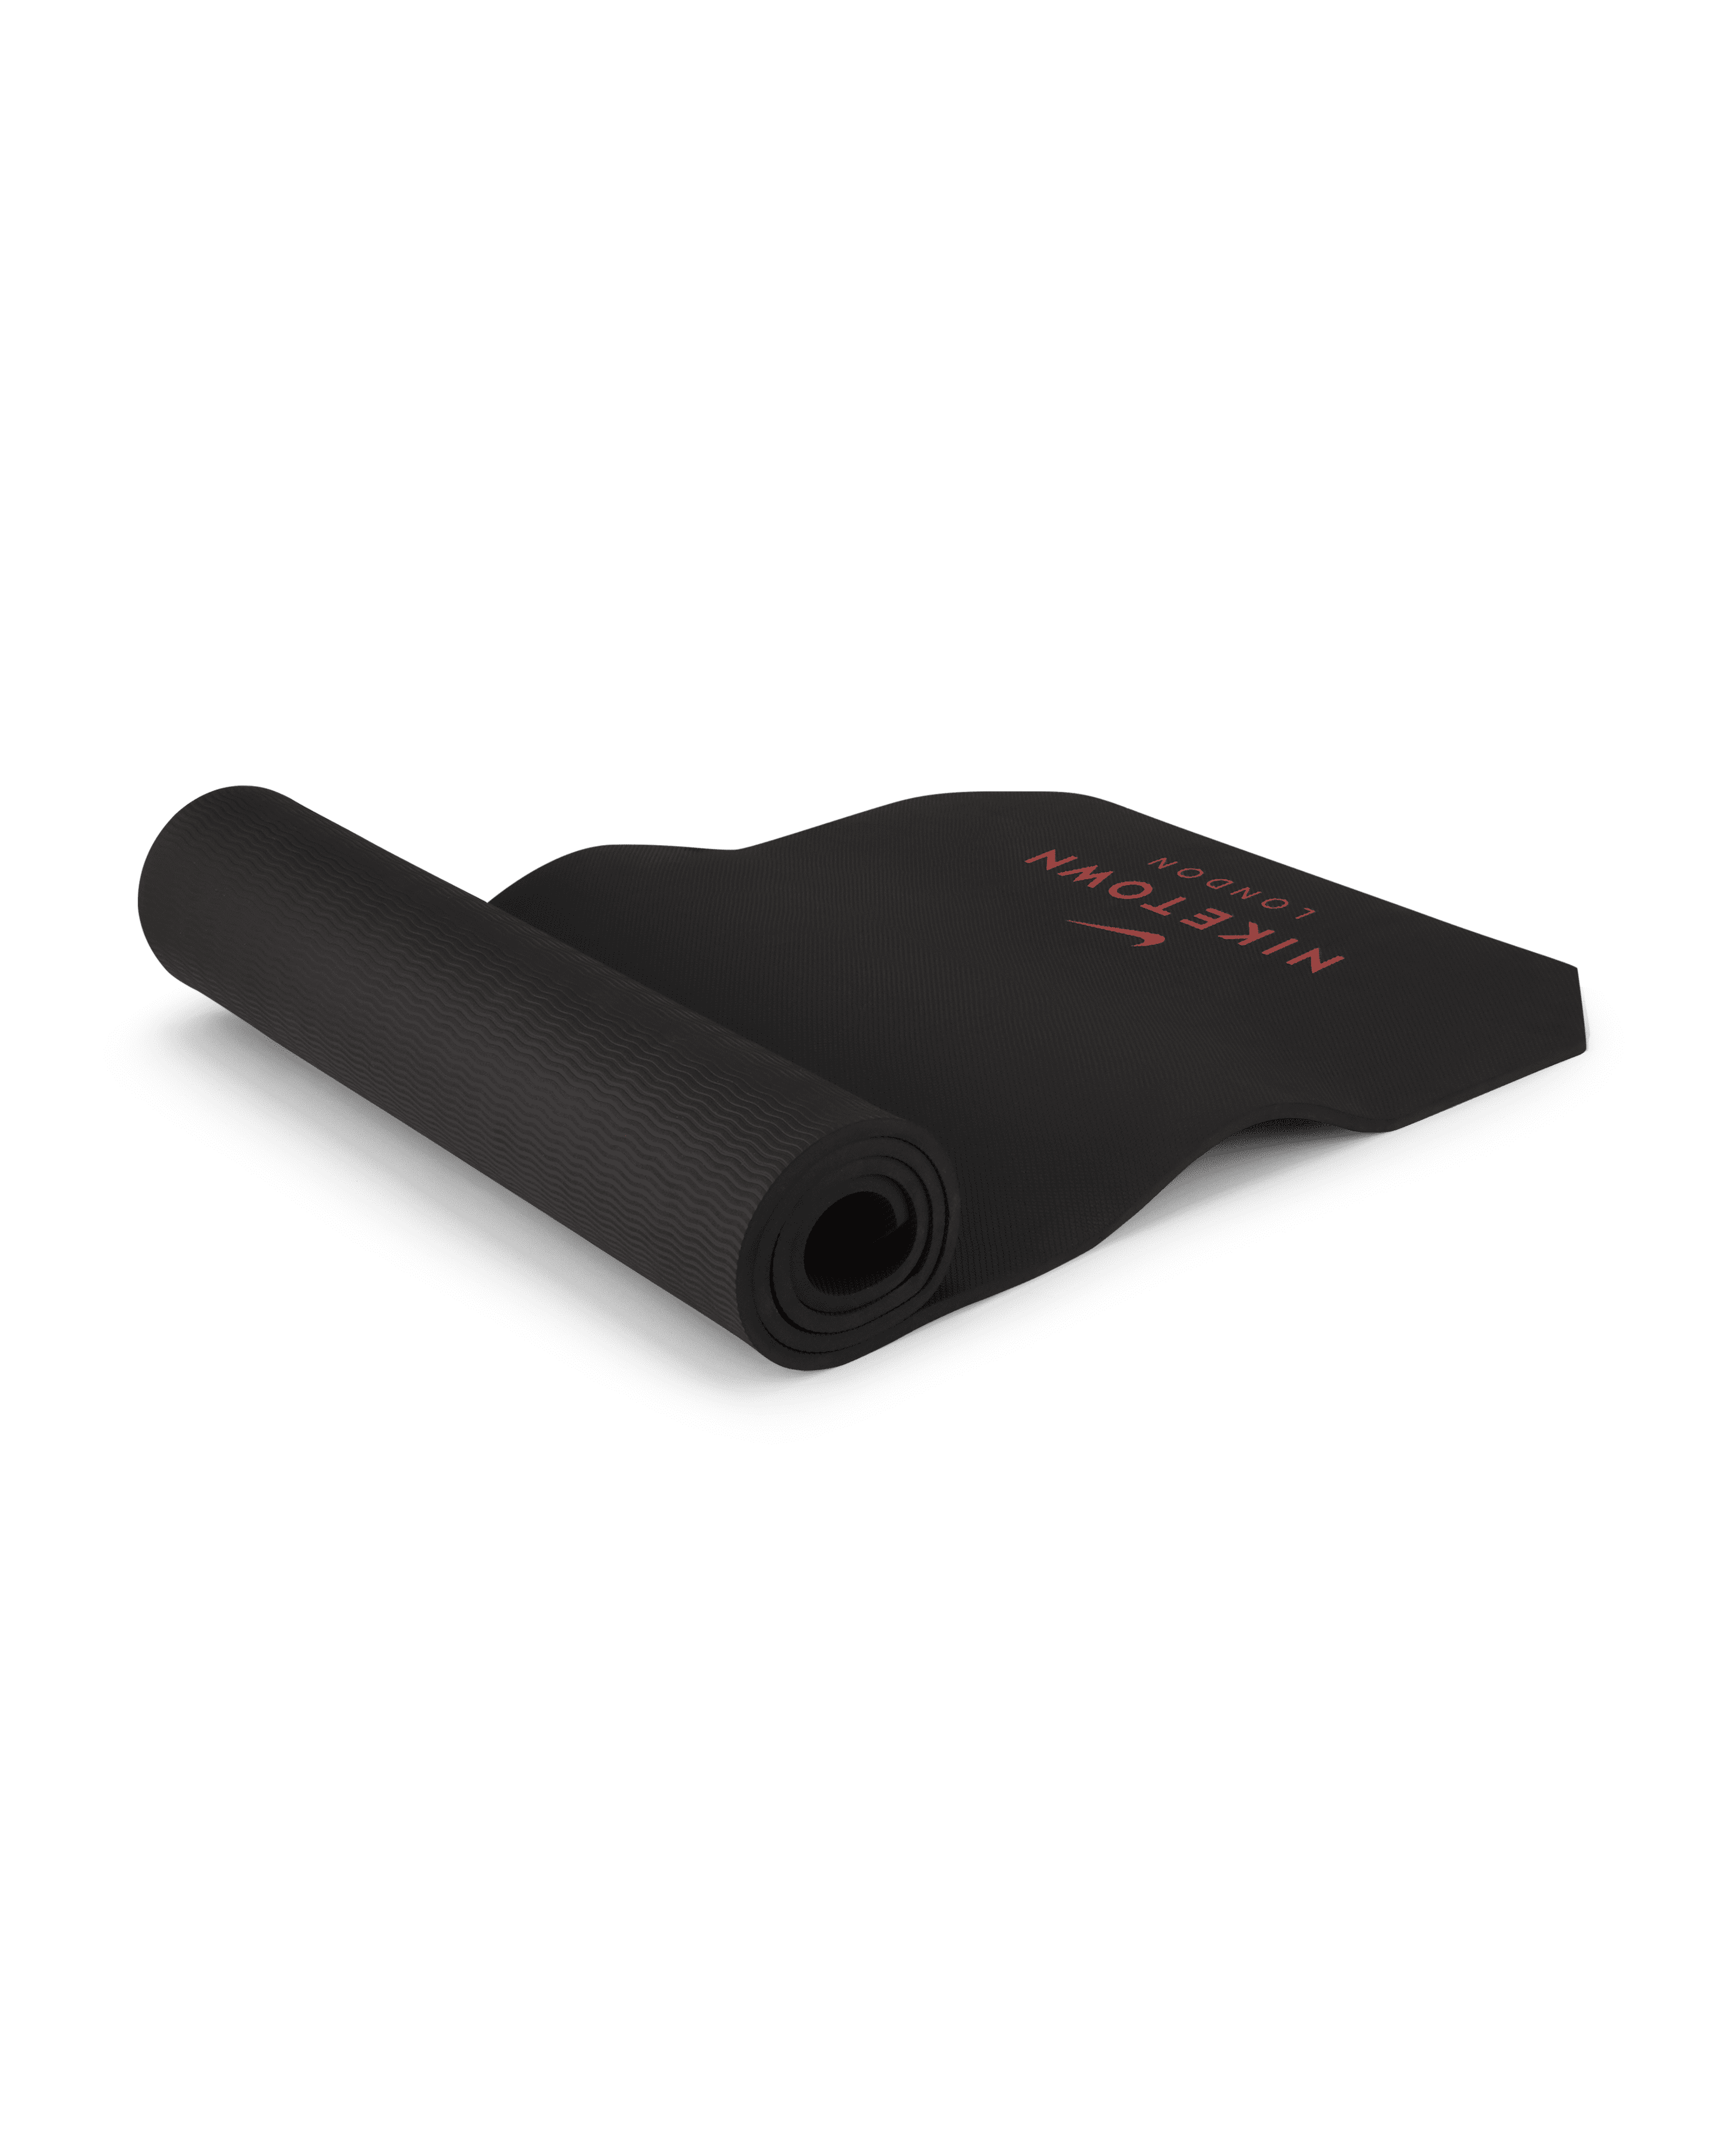 hond salaris preambule 34 Best Yoga Mats & Exercise Mats - Yogi Bare and more tested